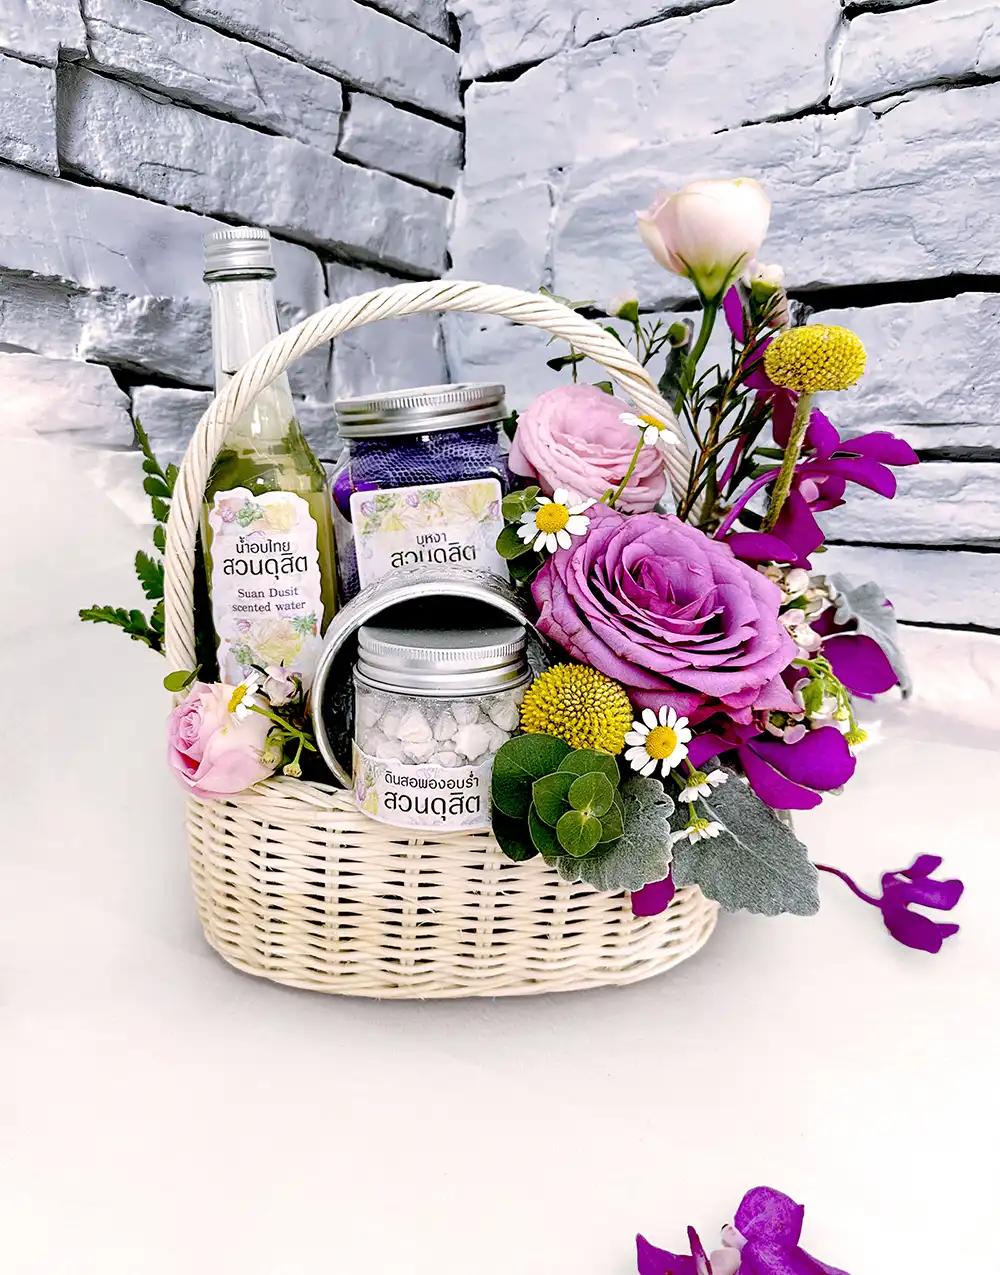 BS006 Fresh flower basket with Thai scented water set, adorned with purple flowers.